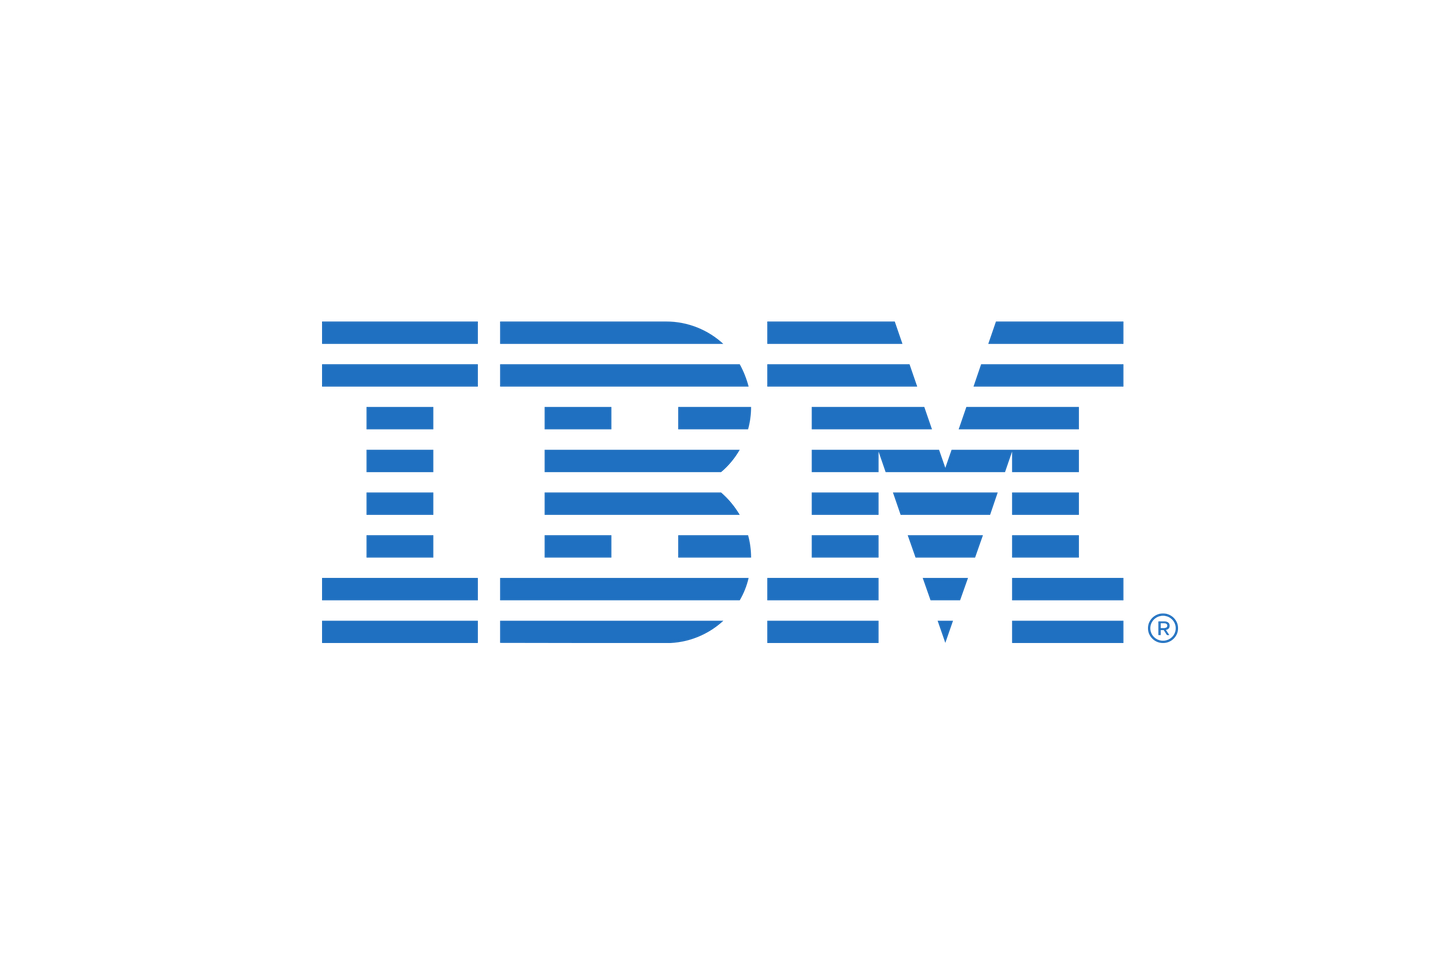 IBM Sterling B2B Services Collaboration Network Kilo Character per Month